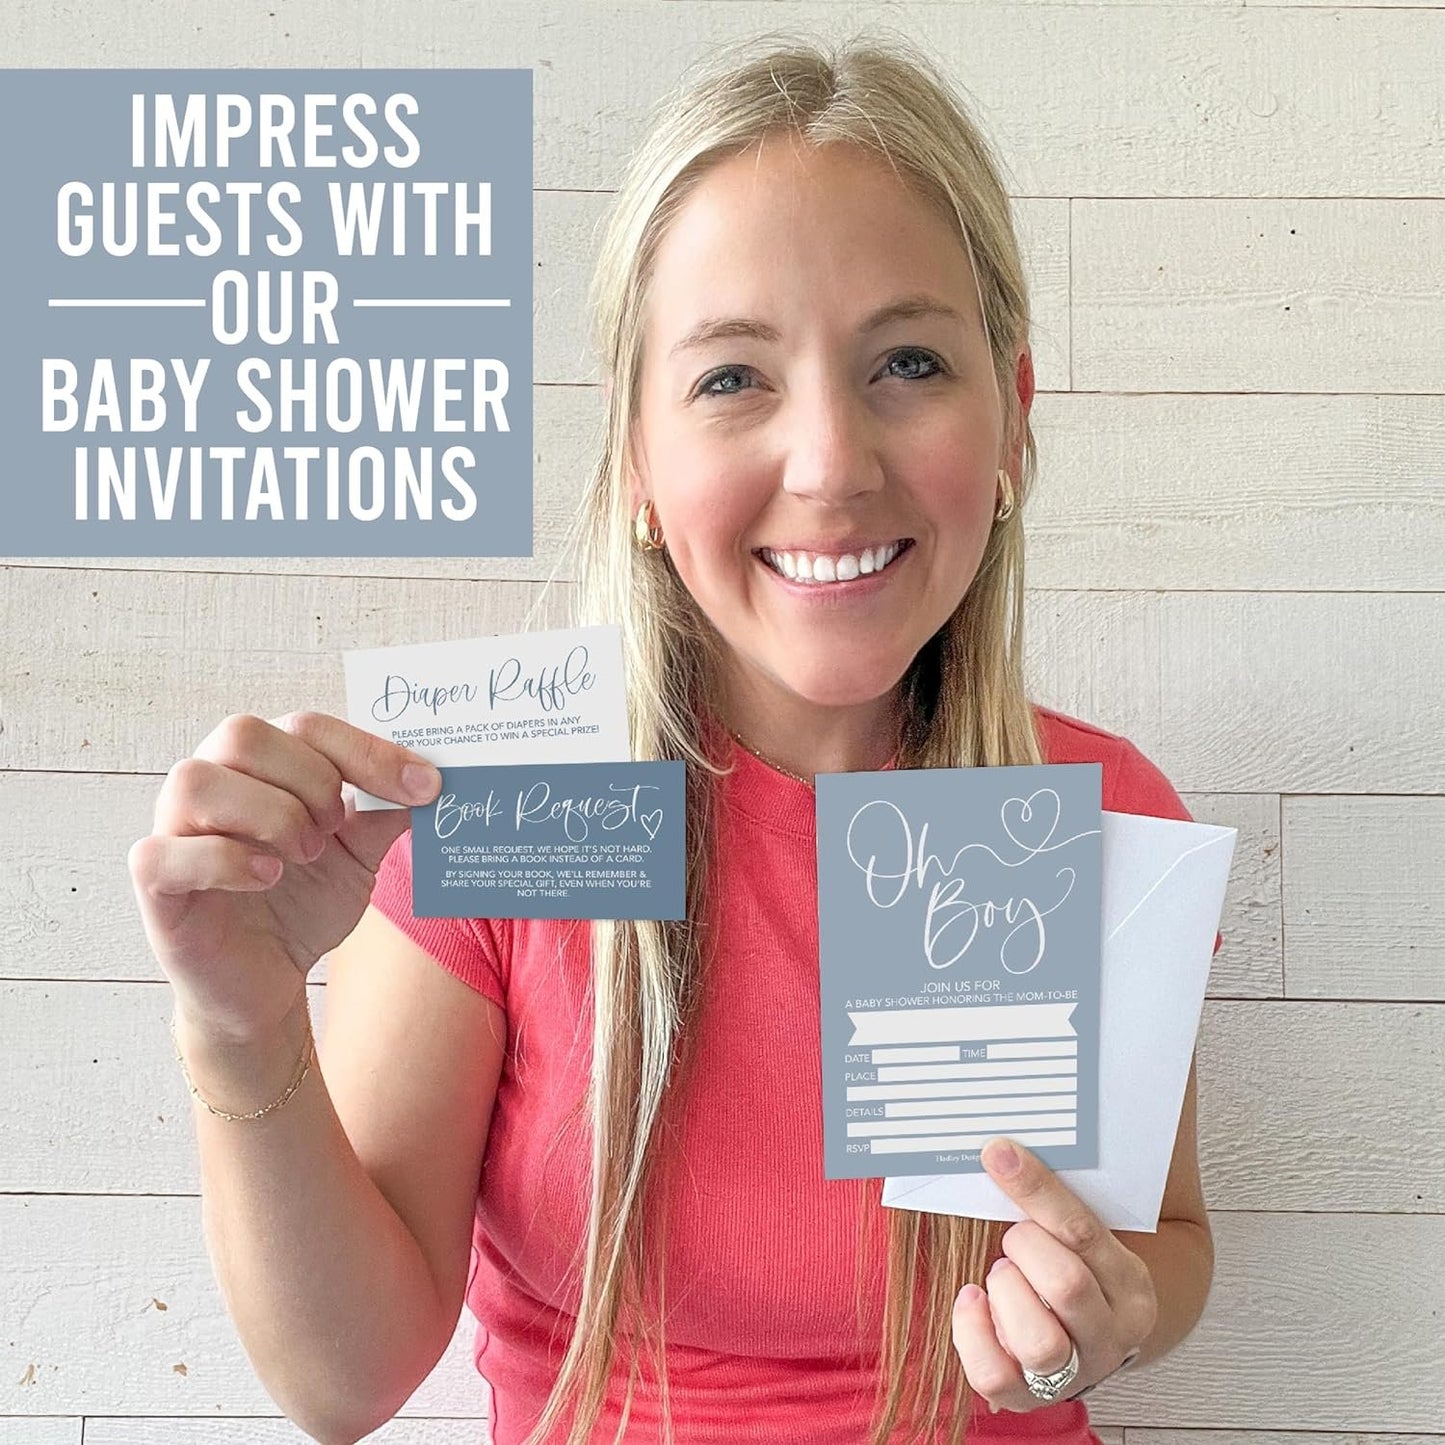 15 Blue Baby Shower Invitations For Boy Baby Shower Ideas - Boy Baby Shower Invites For Boy, Boy Baby Shower Invitations Boy With Diaper Raffle, Baby Boy Shower Invitations, Baby Invitations